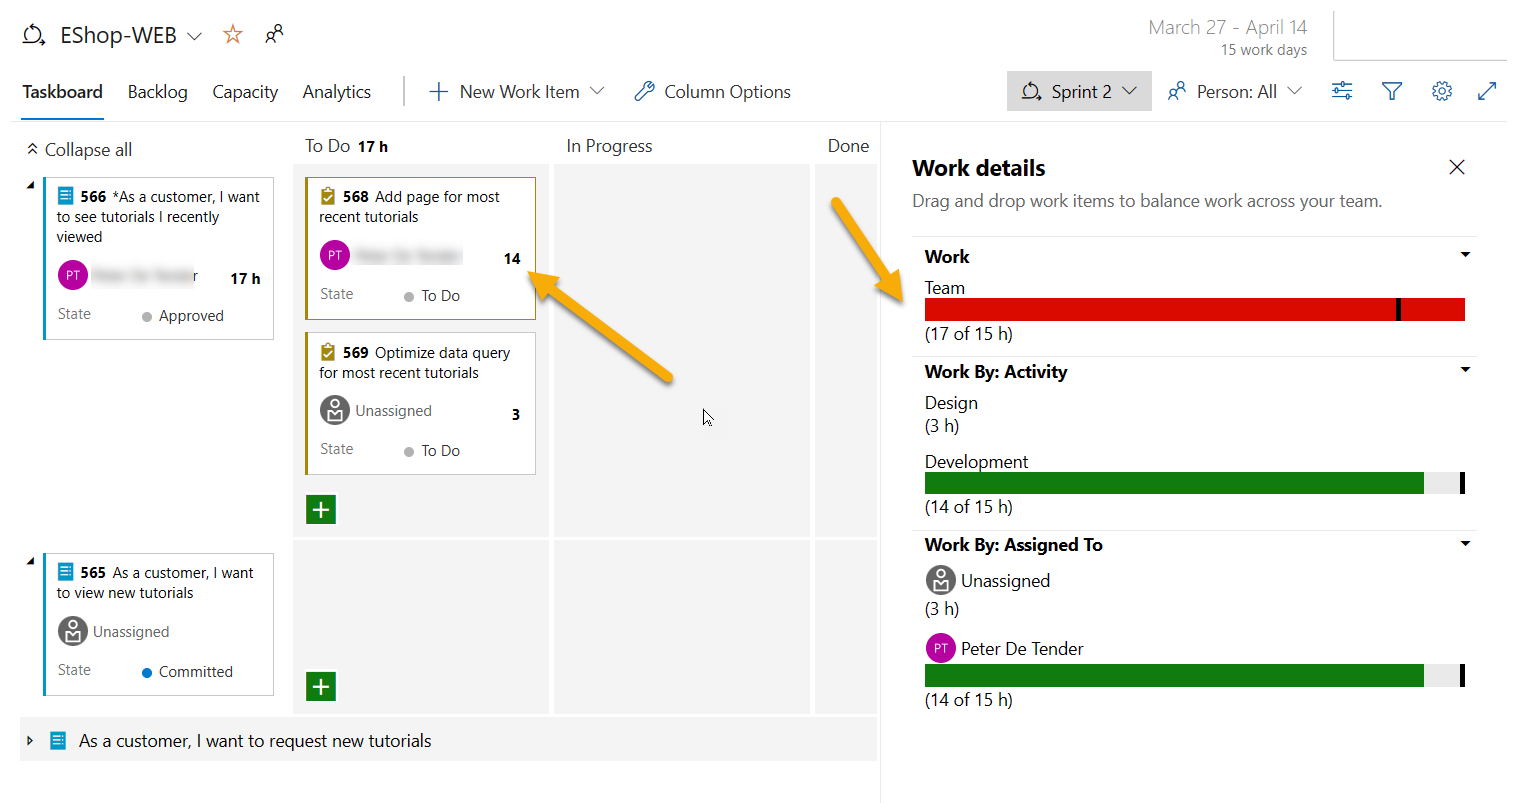 Review the "Work details" section information, team´s assigned time is bigger than capacity.